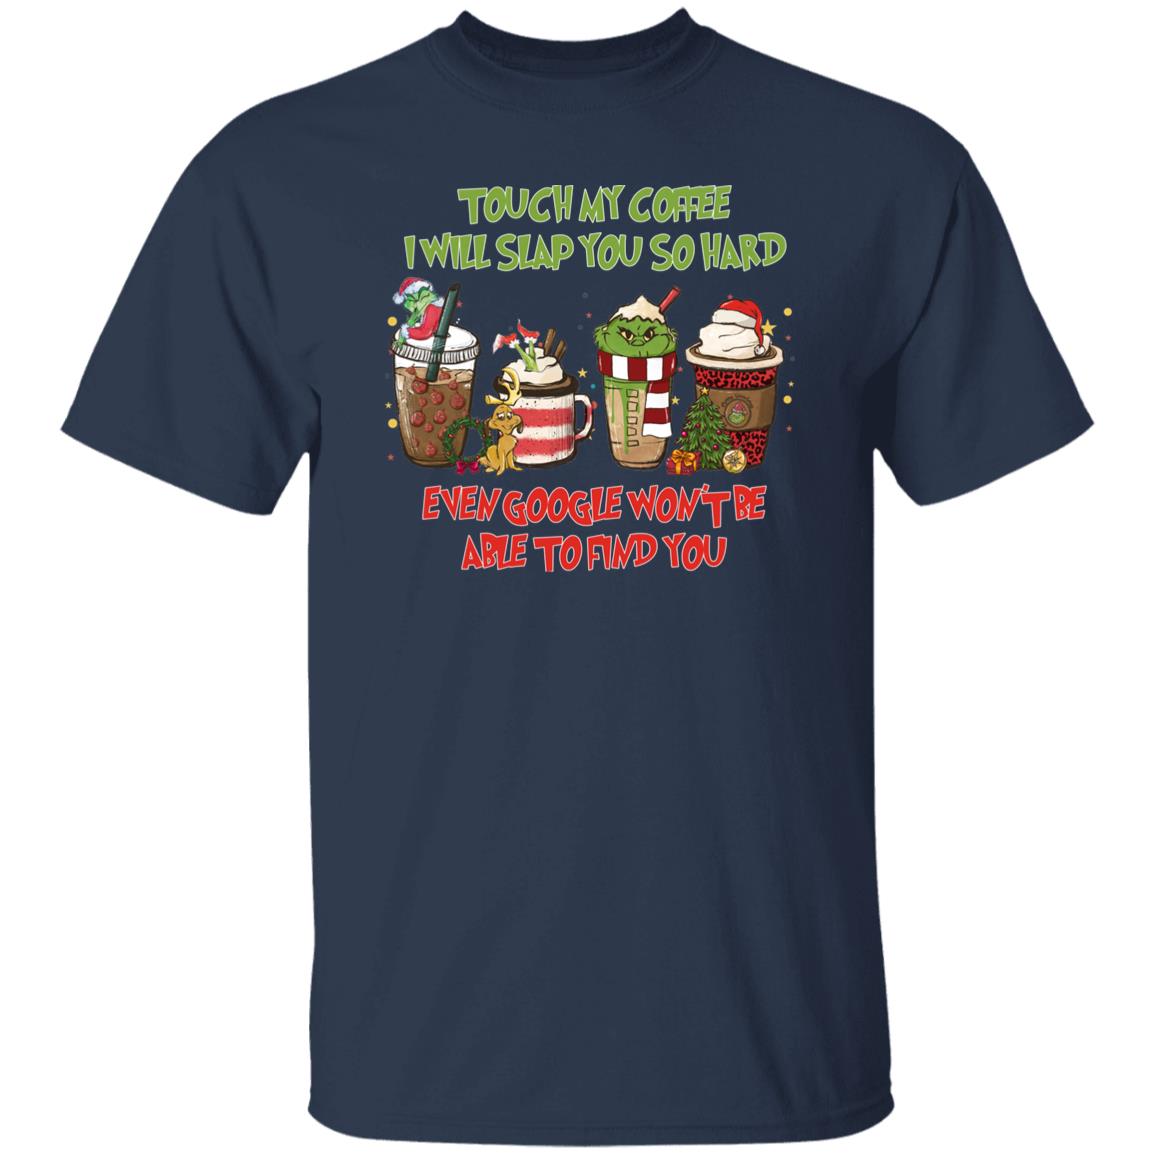 Touch My Coffee I Will Slap You Even Google Wont Be Able To Find You Shirt